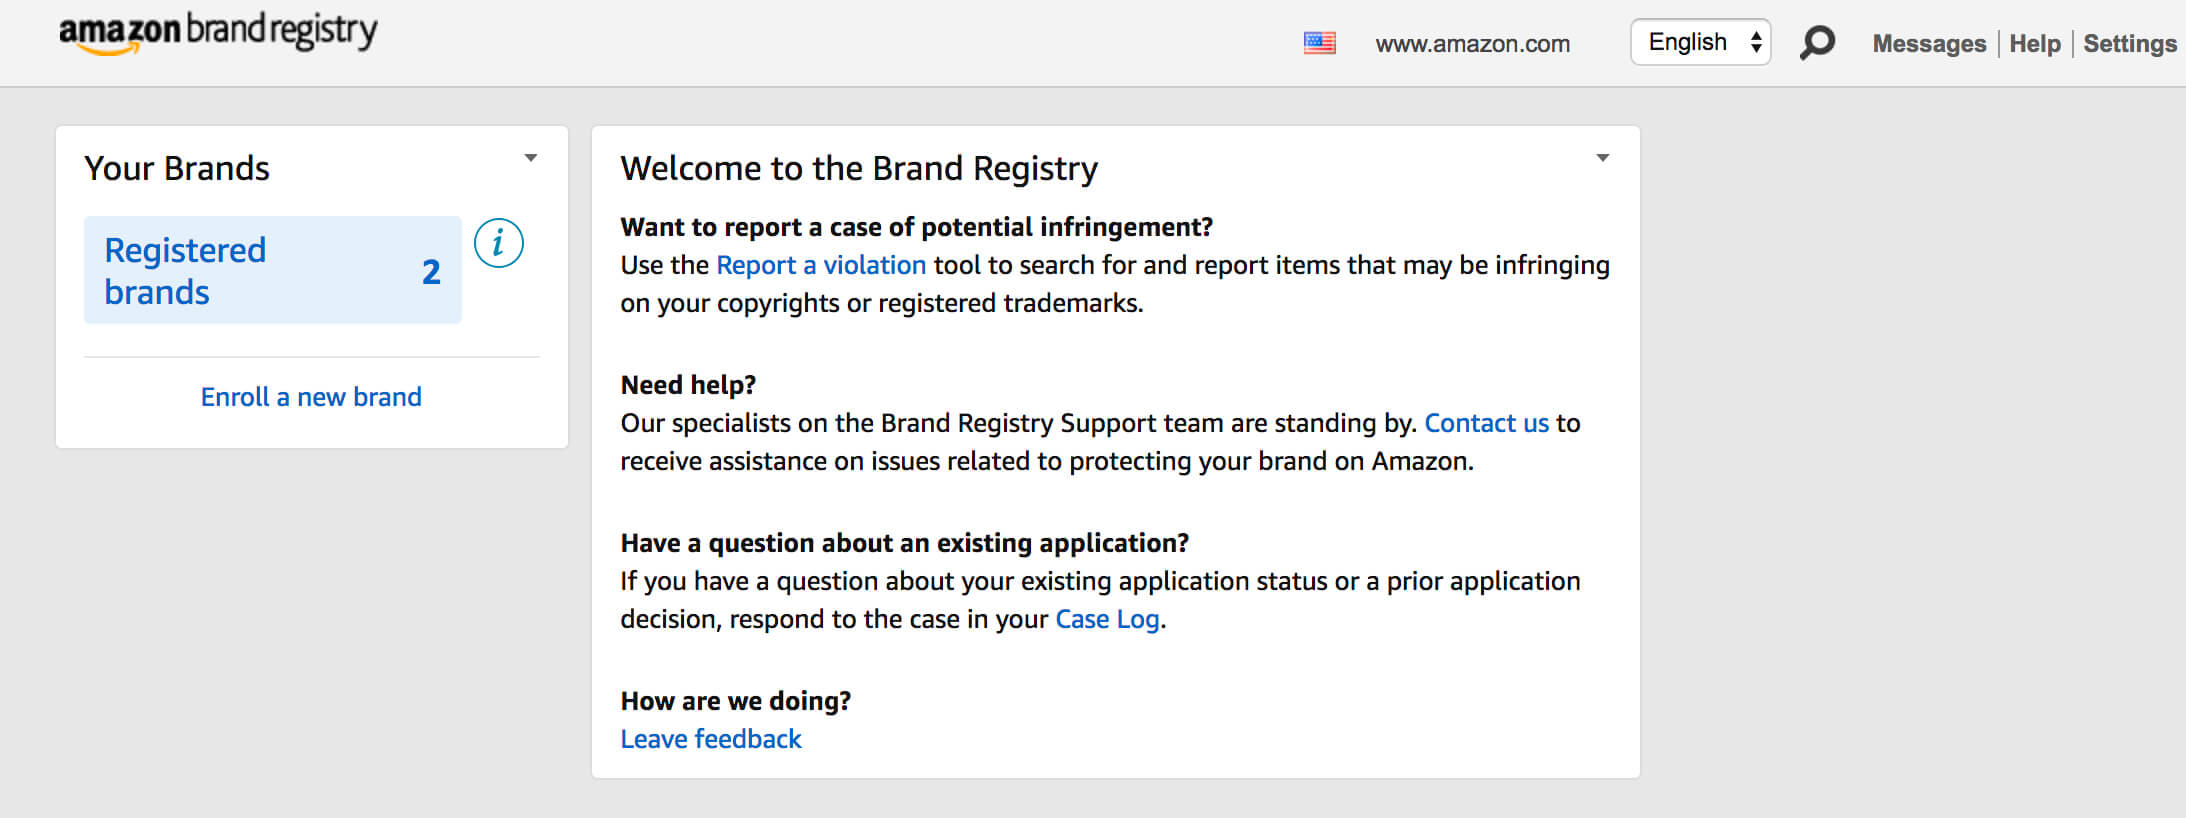 Welcome to brand registry 2.0